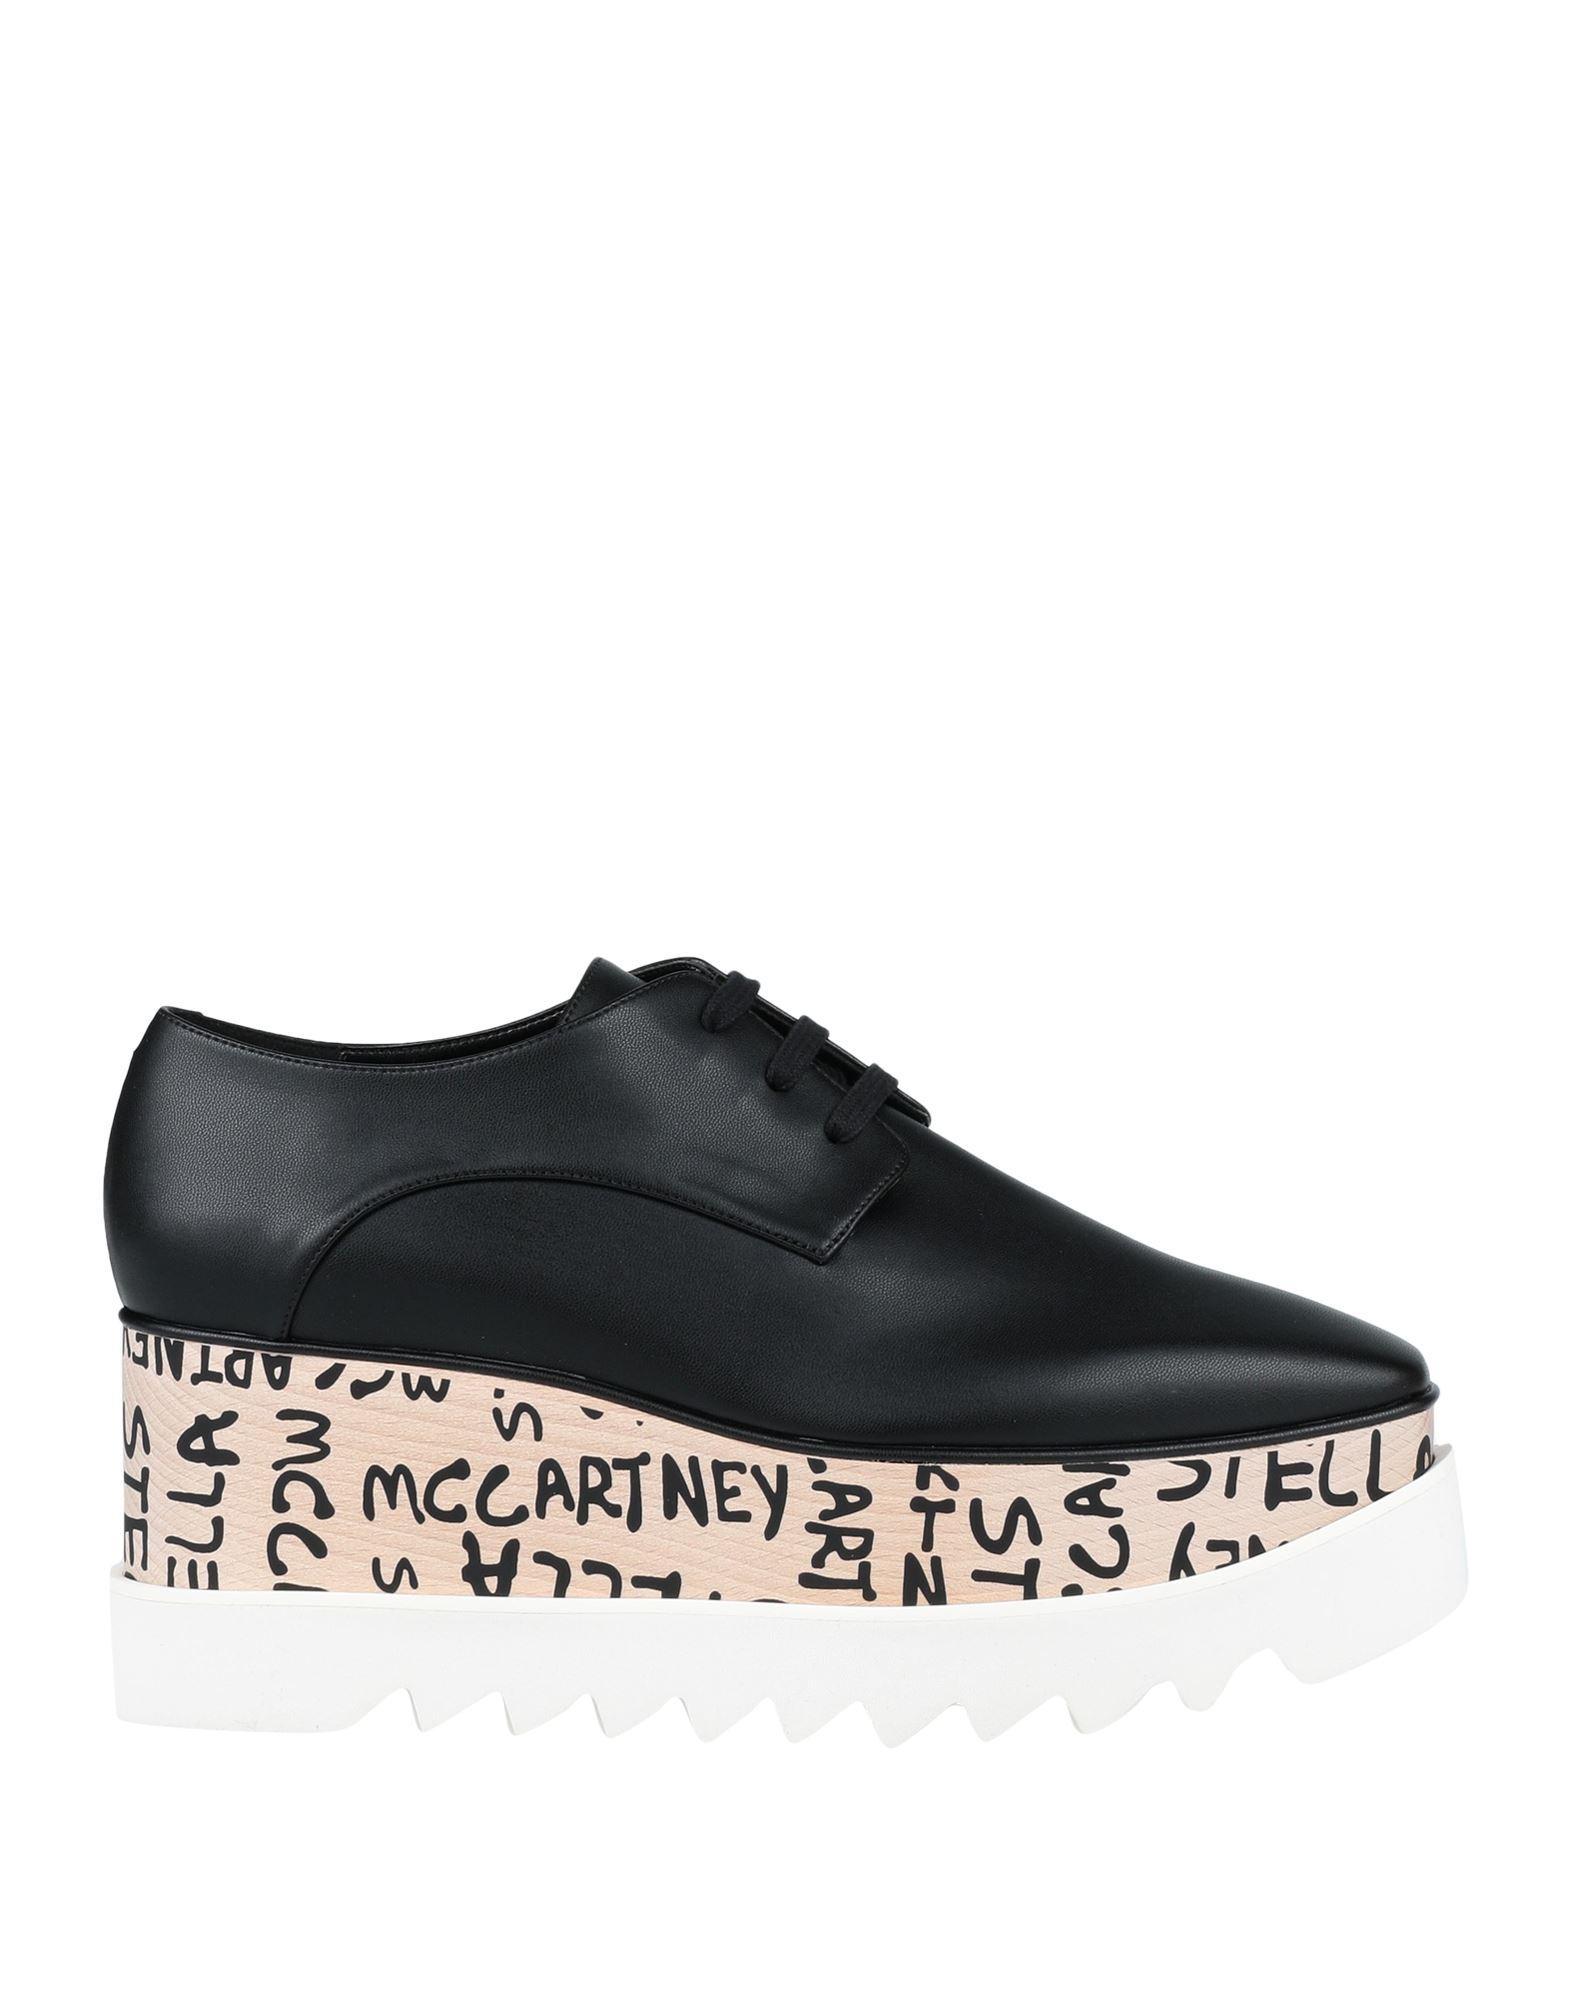 Stella McCartney Lace-up Shoes in Black | Lyst